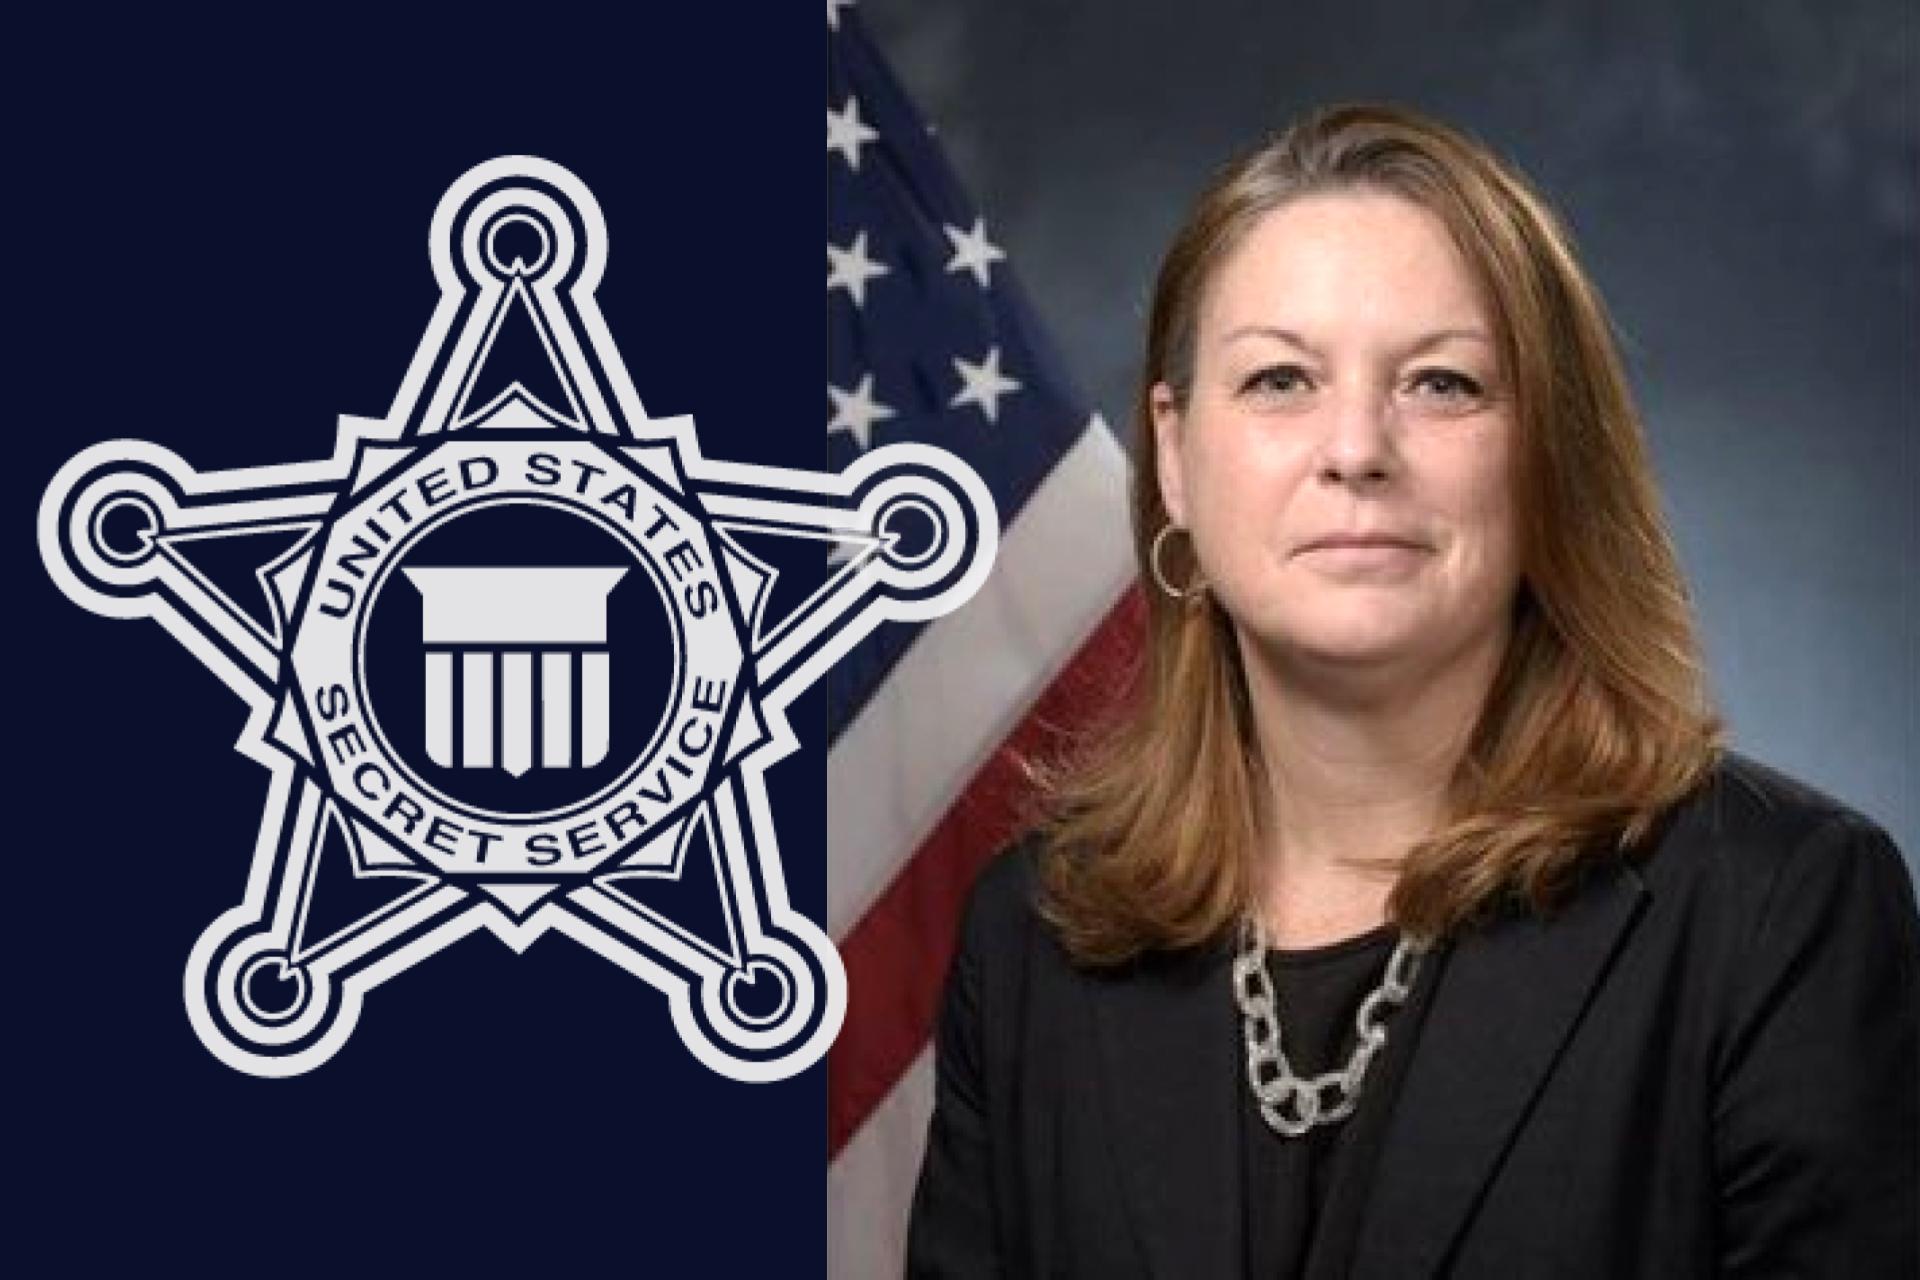 HLS.Today President Biden Appointed Kimberly Cheatle as Secret Service Director